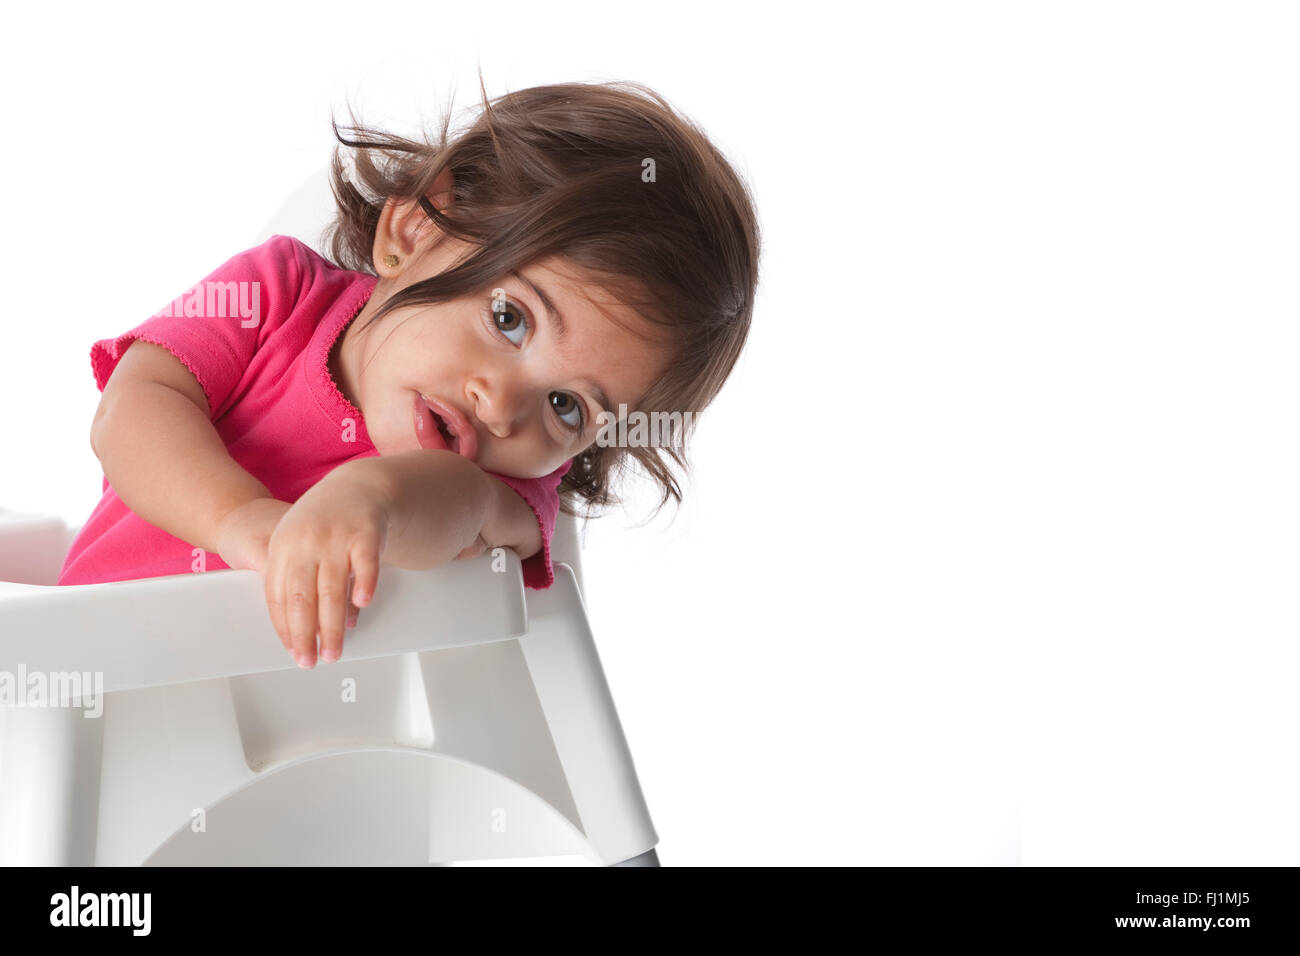 Portrait of a tired baby girl on white background Stock Photo